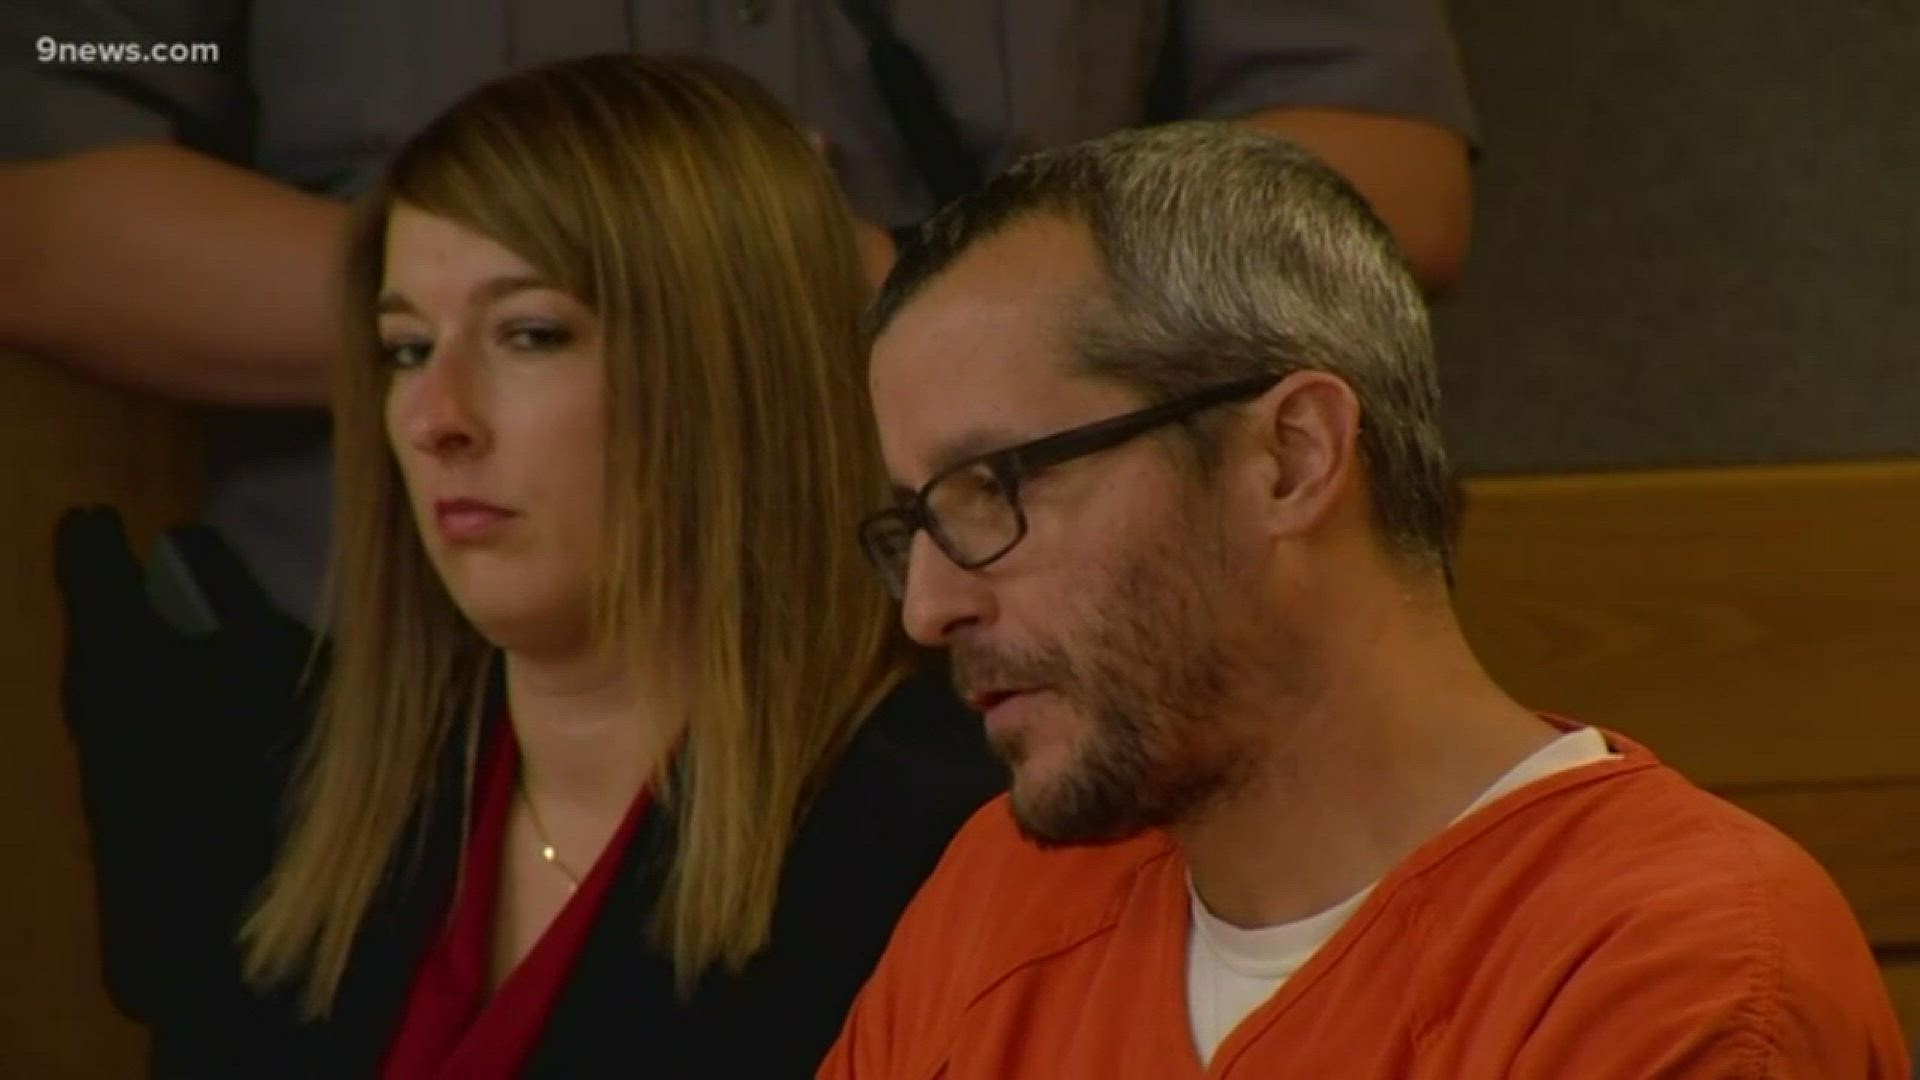 During a sentencing hearing for Chris Watts, District Attorney Michael Rourke delivered what the testimony would have revealed if the case had gone to trial. Watts pleaded guilty to killing his pregnant wife Shanann and their two young daughters.